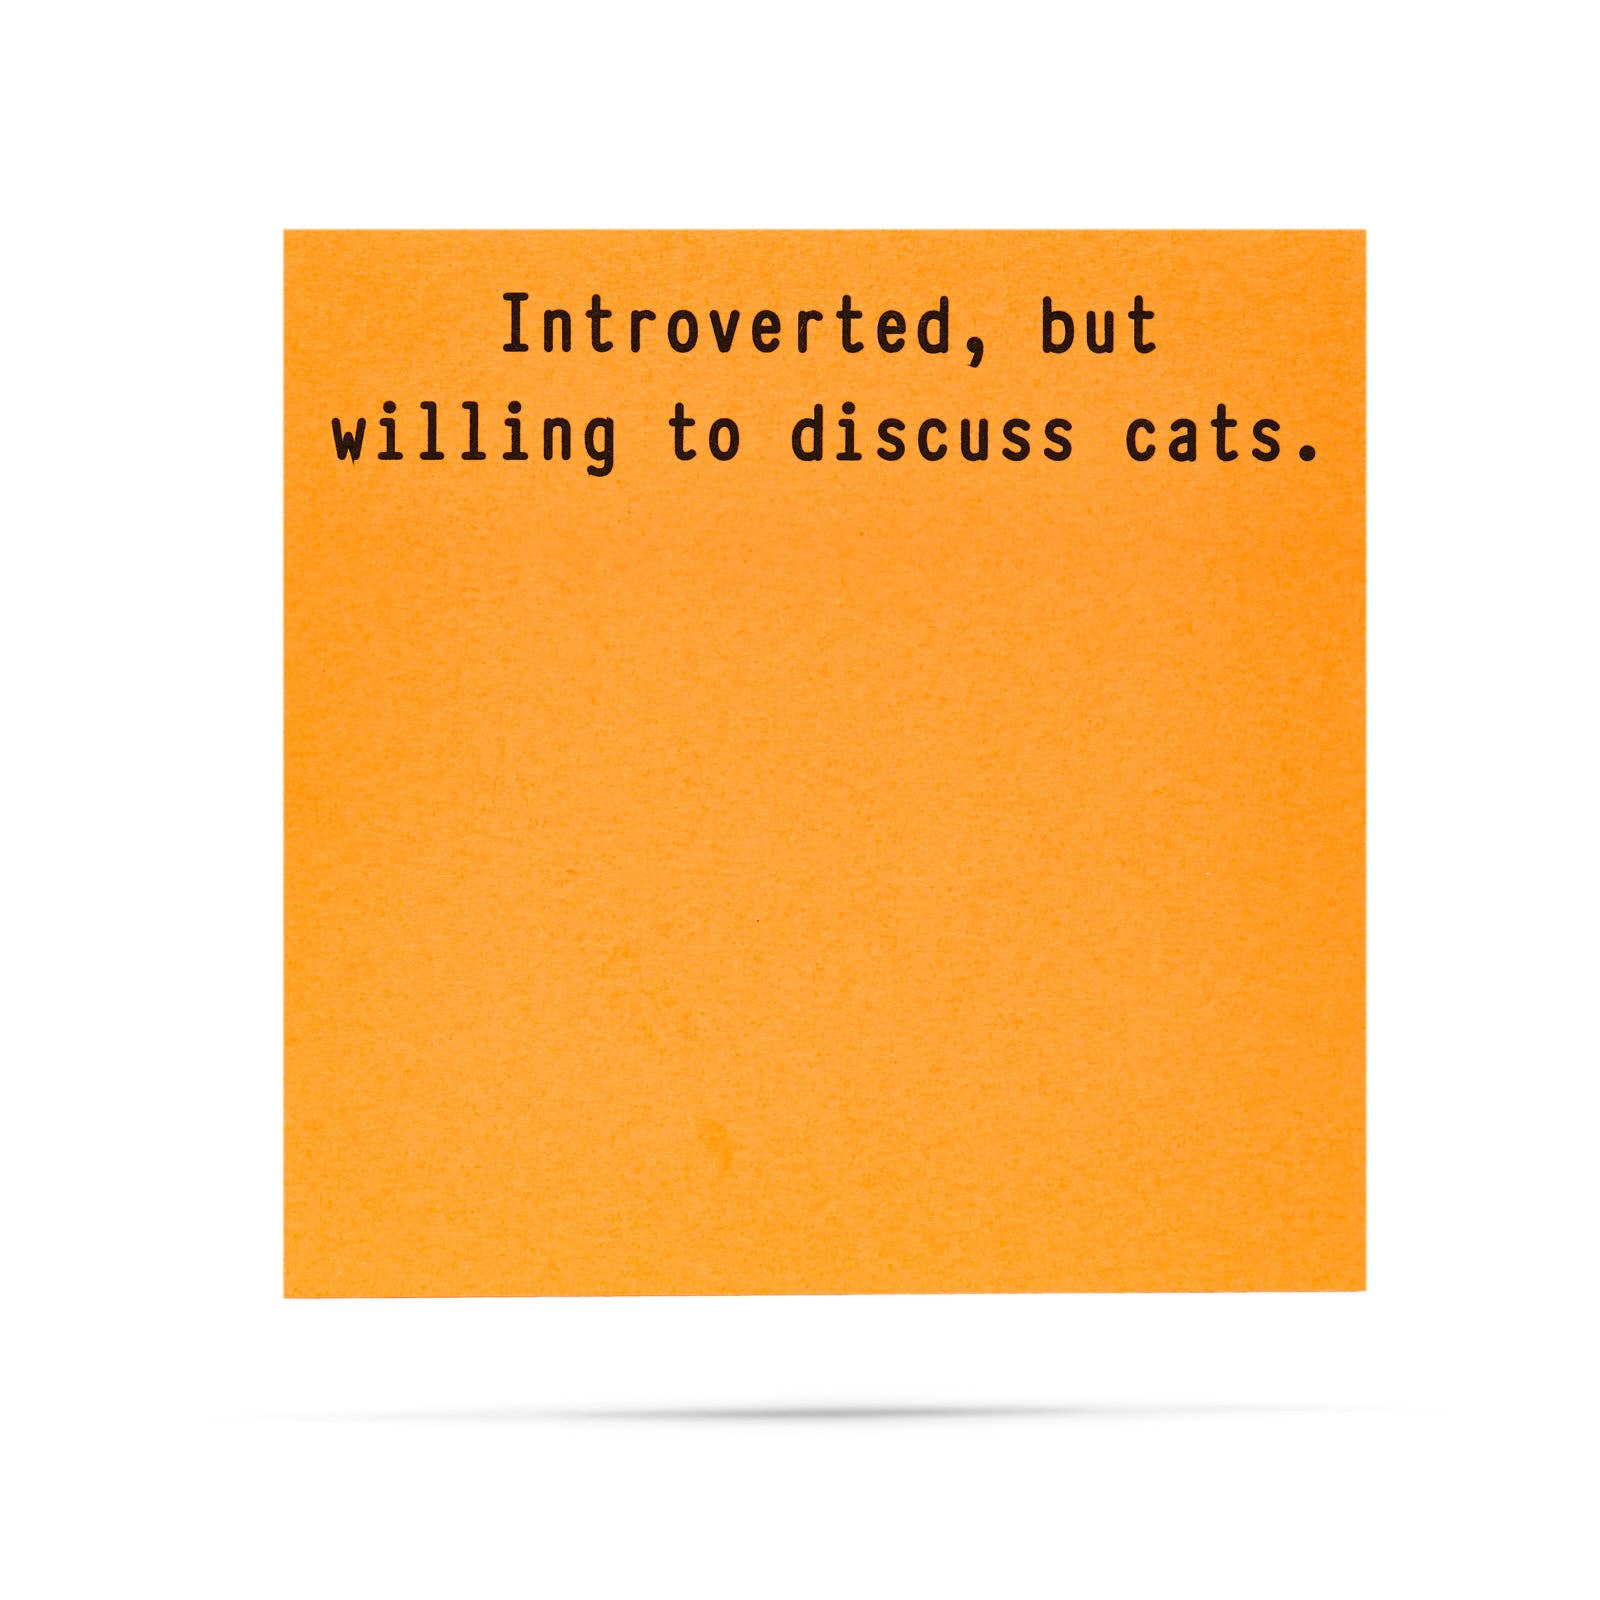 Introverted, but willing to discuss cats | sticky note pads